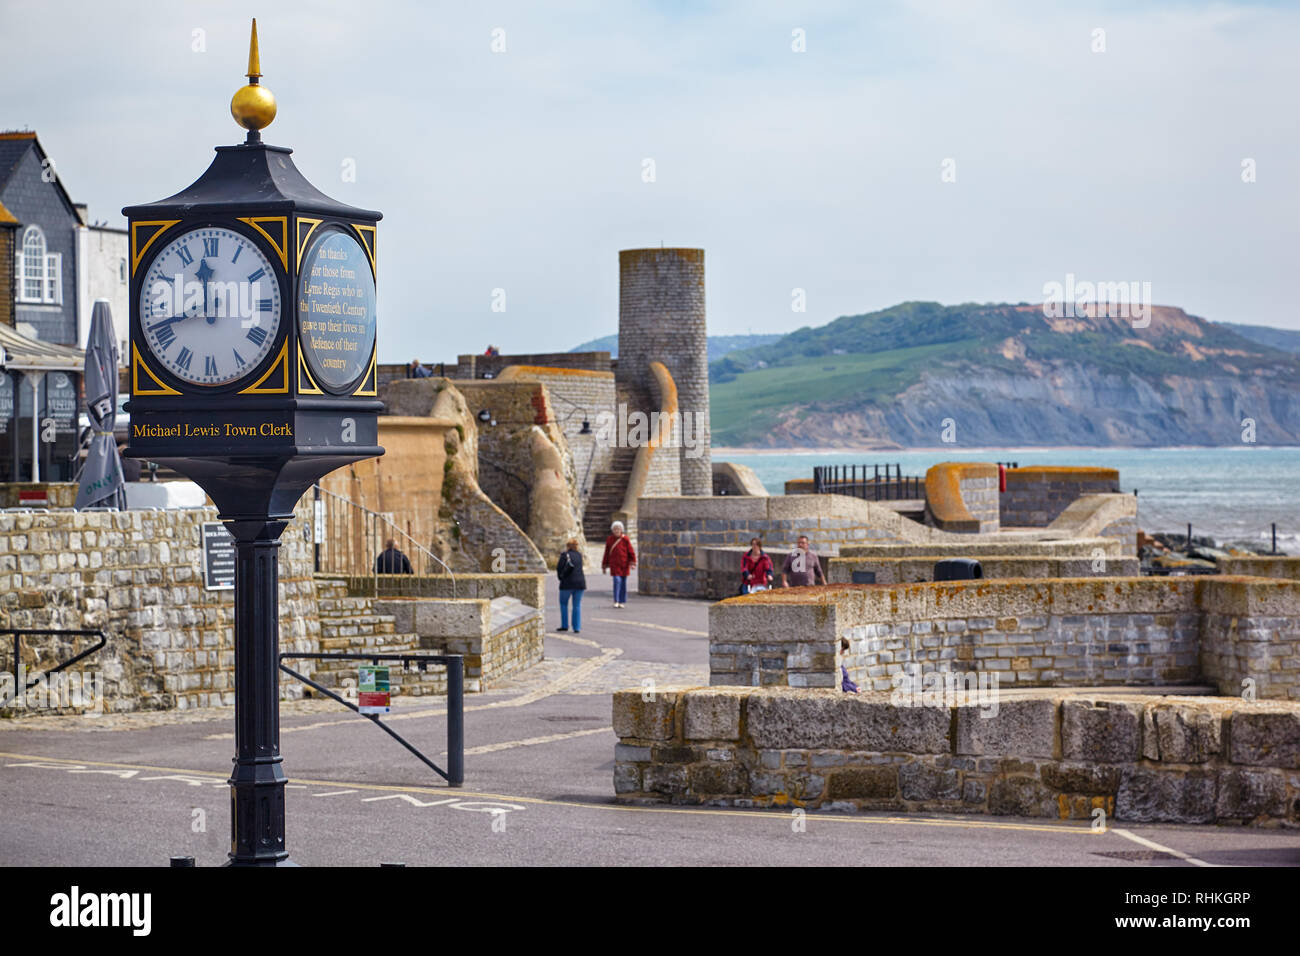 LYME REGIS, ENGLAND - MAY 12, 2009: Lyme Regis 20th century conflicts clock in the Cobb Gate Car Park and the Gun Cliff on the background. Lyme Regis. Stock Photo